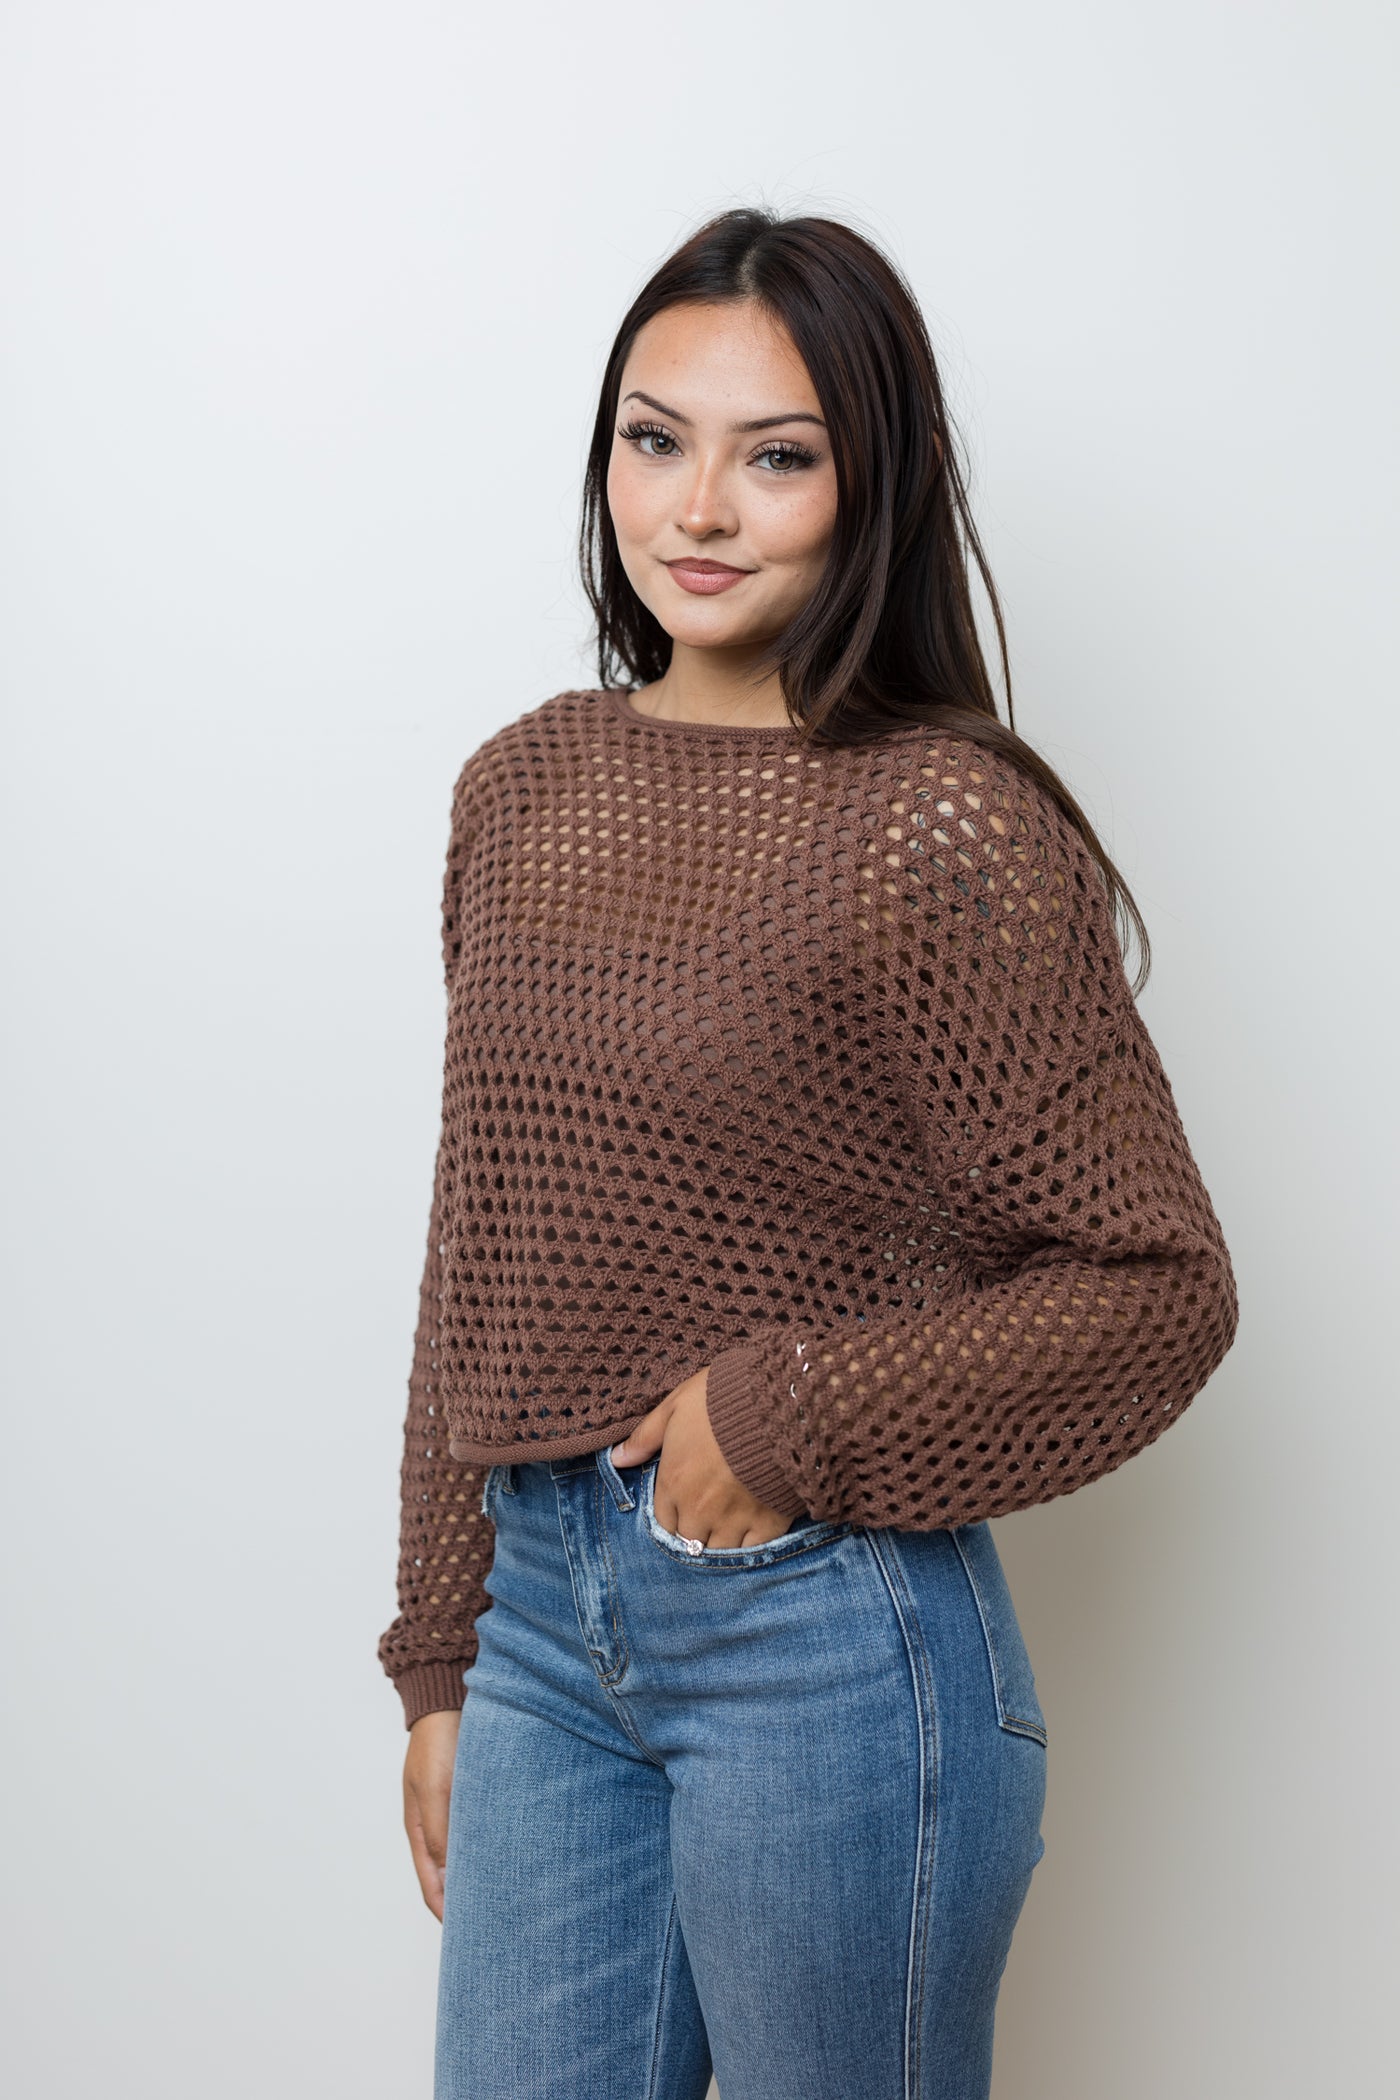 The Safety Net Cocoa Crochet Knit Top